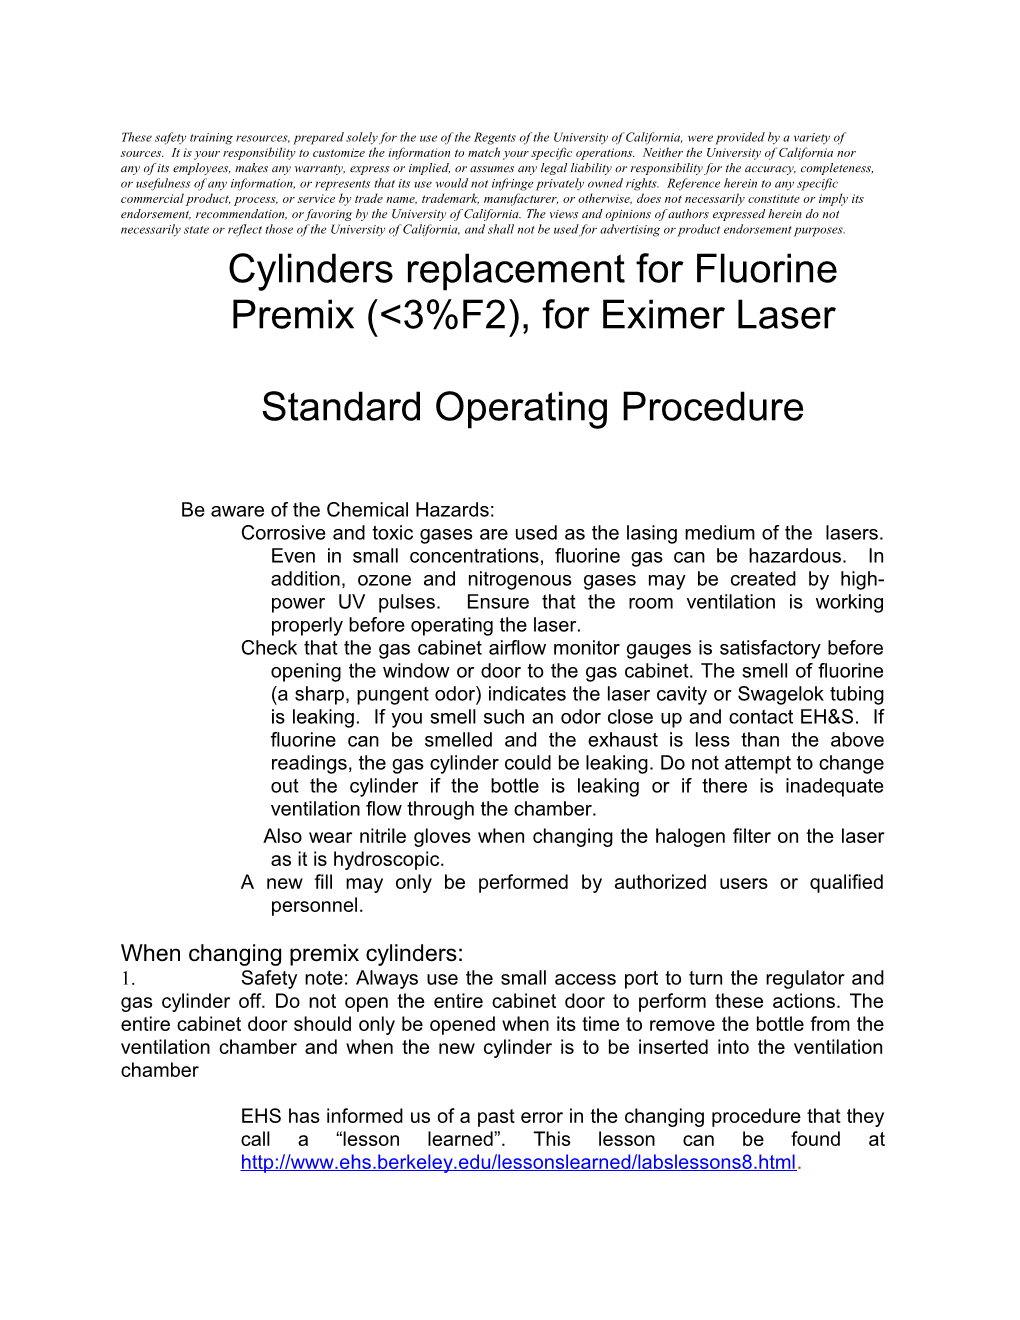 Cylinders Replacement for Fluorine Premix (&lt;3%F2), for Eximer Laser